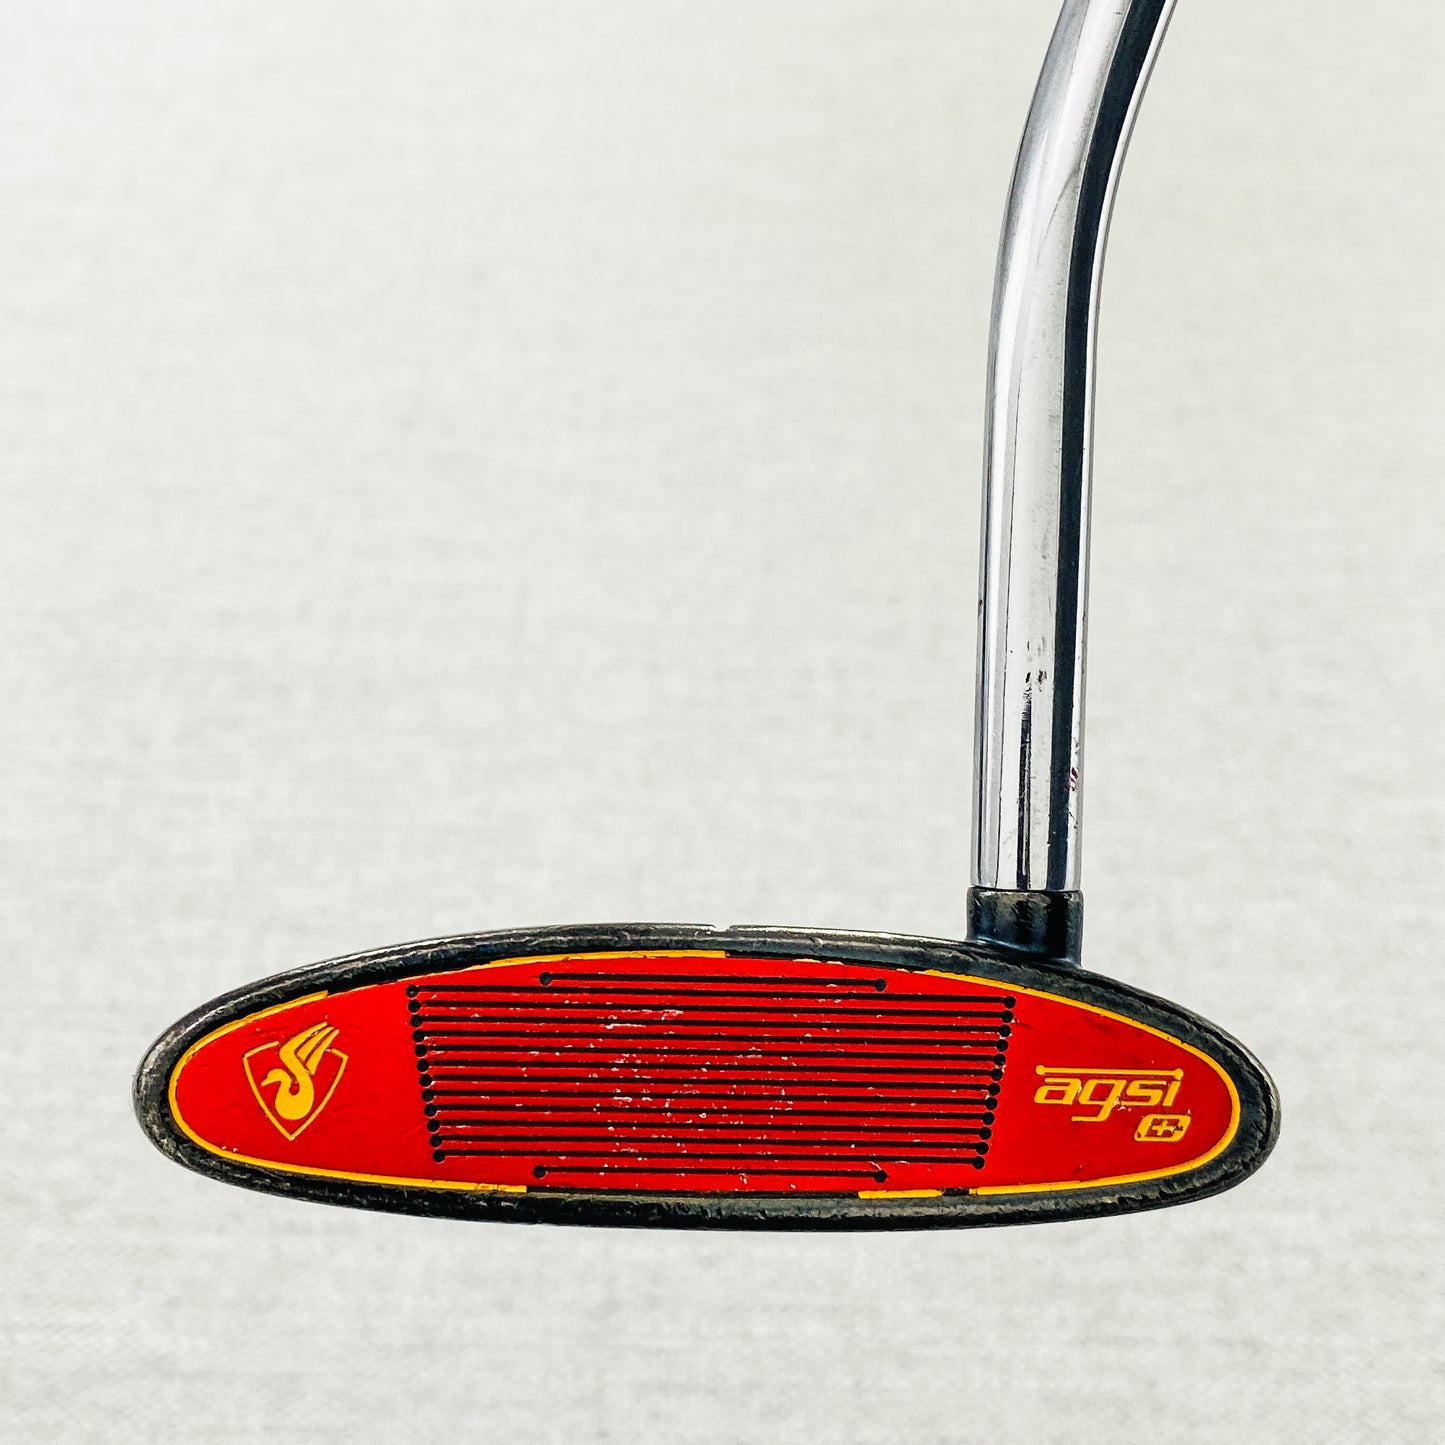 TaylorMade Rossa Fuji Putter. 33 inch - Average Condition # GP191